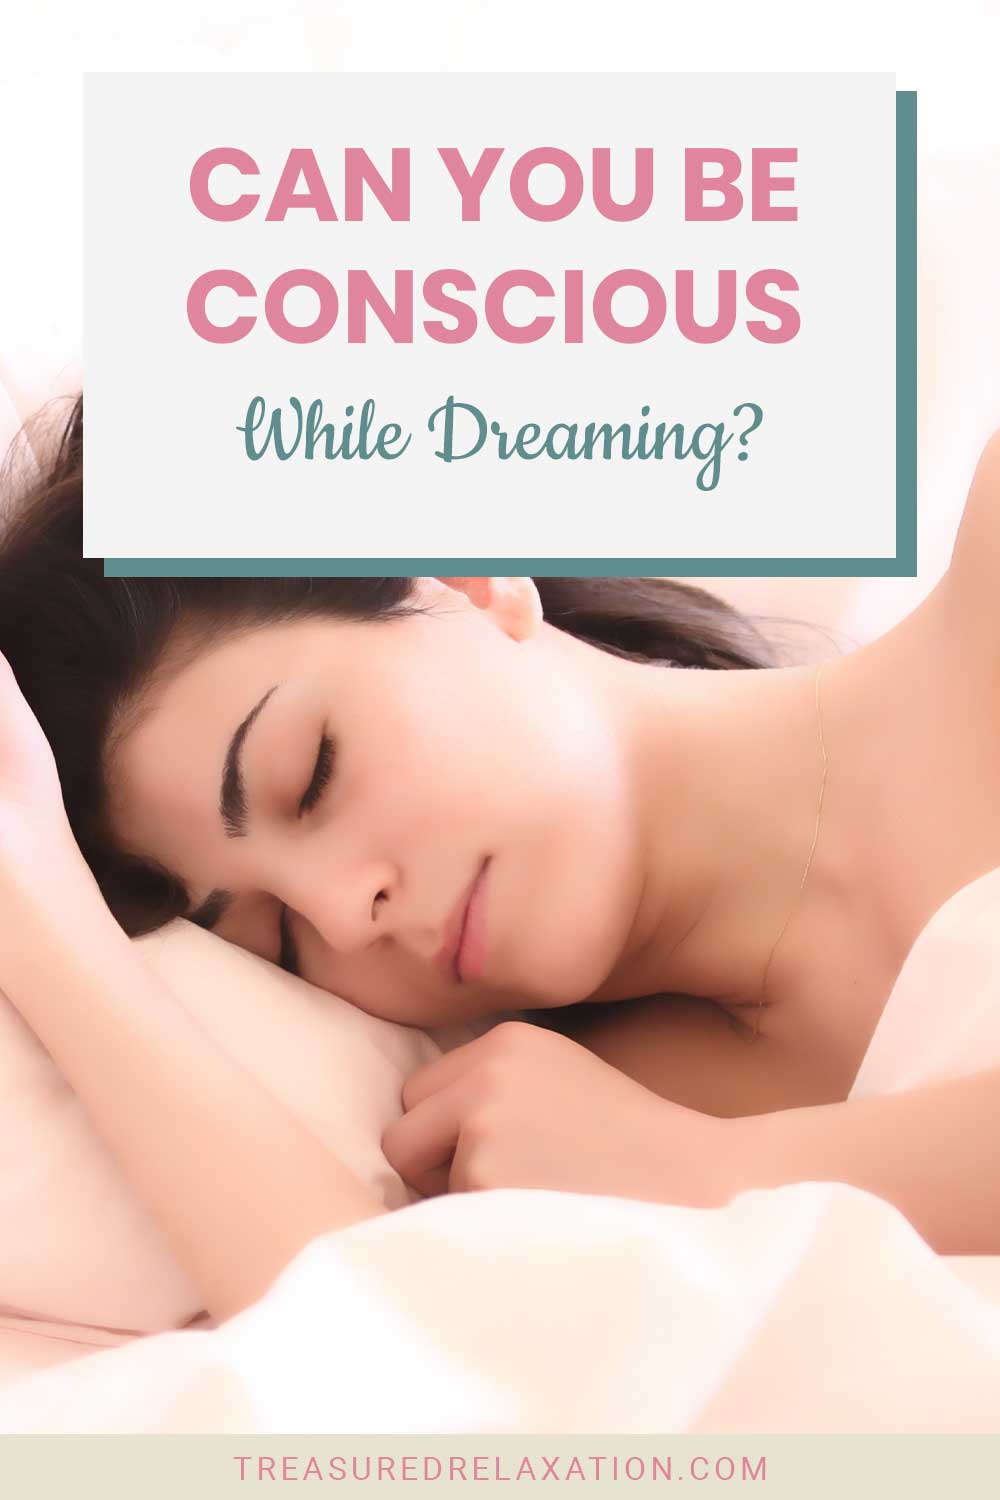 Can You Be Conscious While Dreaming?